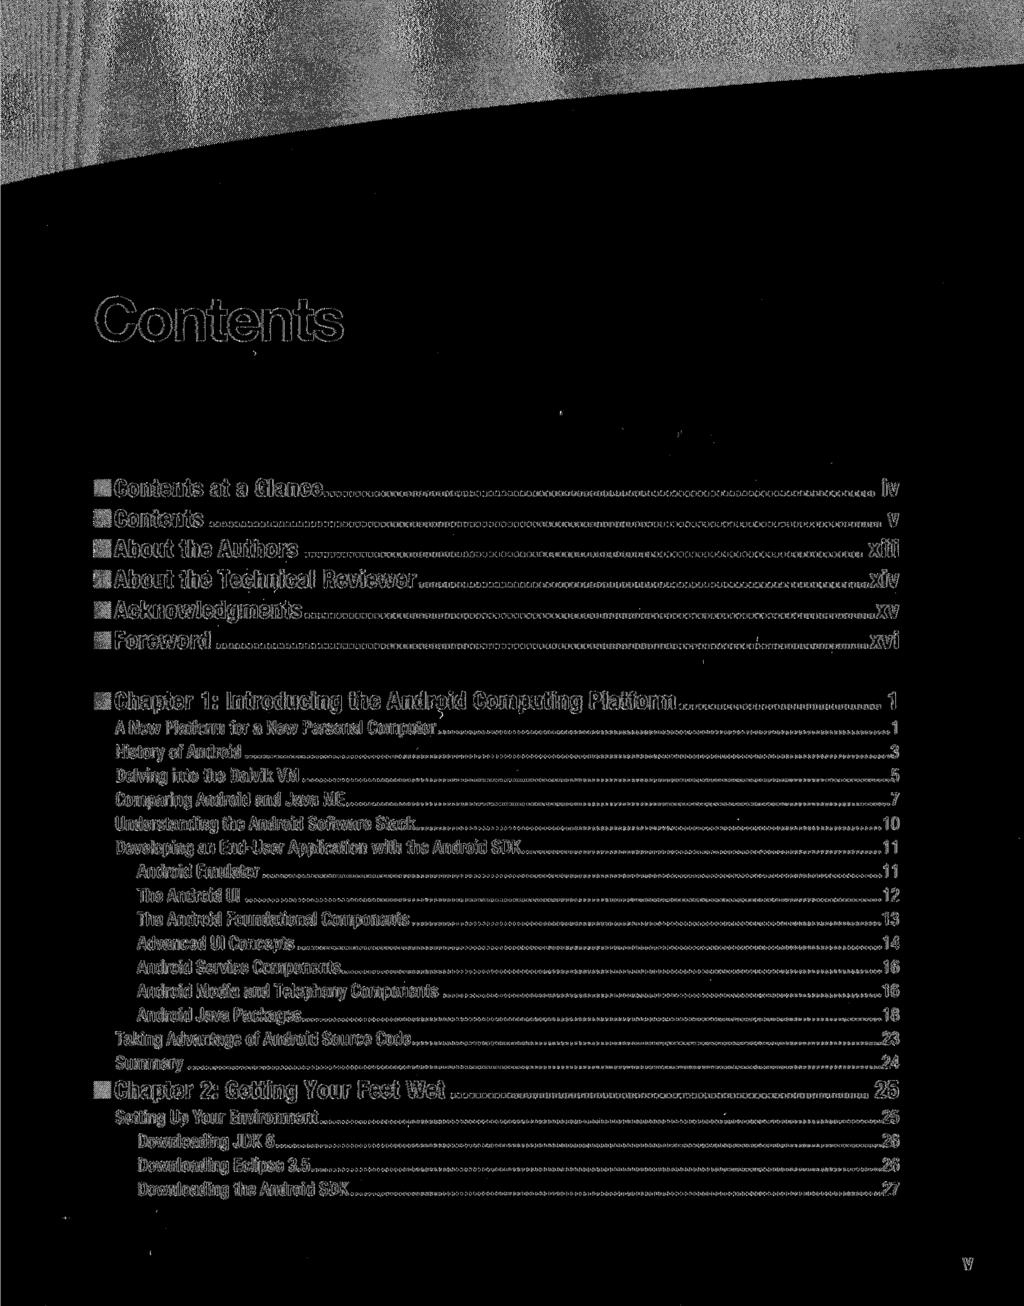 Contents Contents at a Glance Contents About the Authors About the Technical Reviewer Acknowledgments Foreword iv v xiii xiv xv xvi Chapter 1: Introducing the Android Computing Platform 1 A New